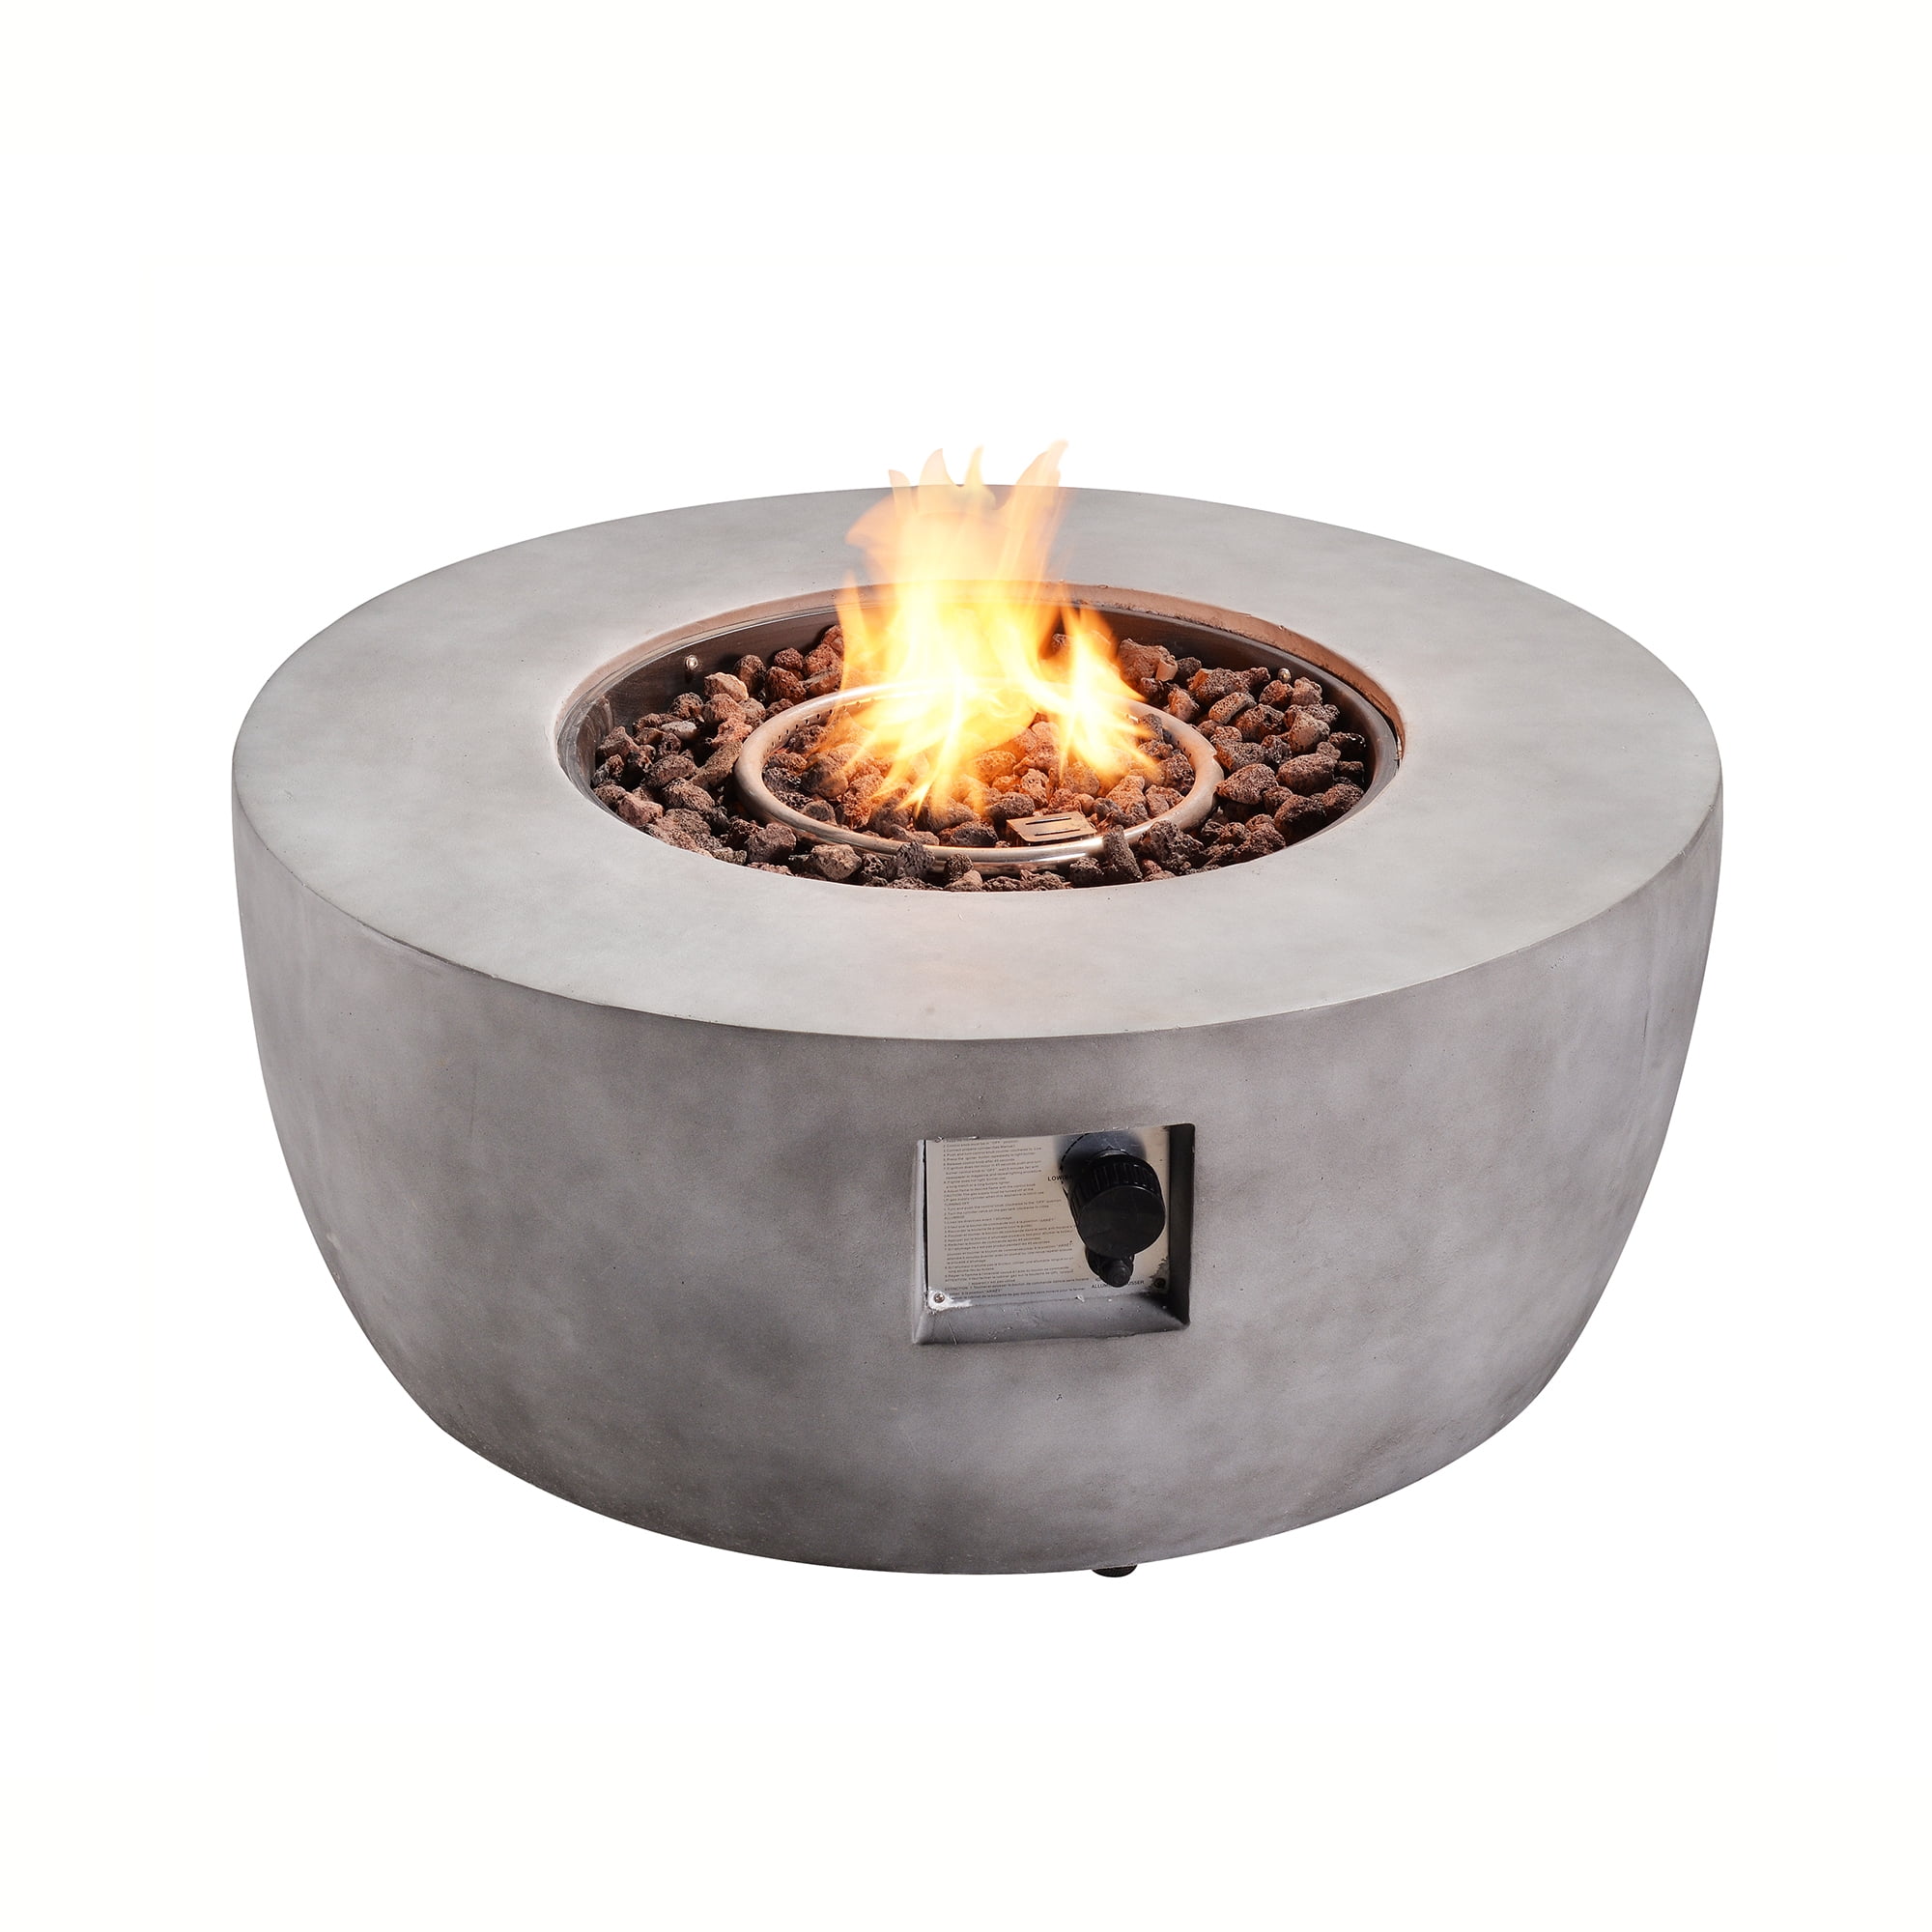 Peaktop 36" Outdoor Round Gas Fire Pit with Concrete Base - Walmart.com